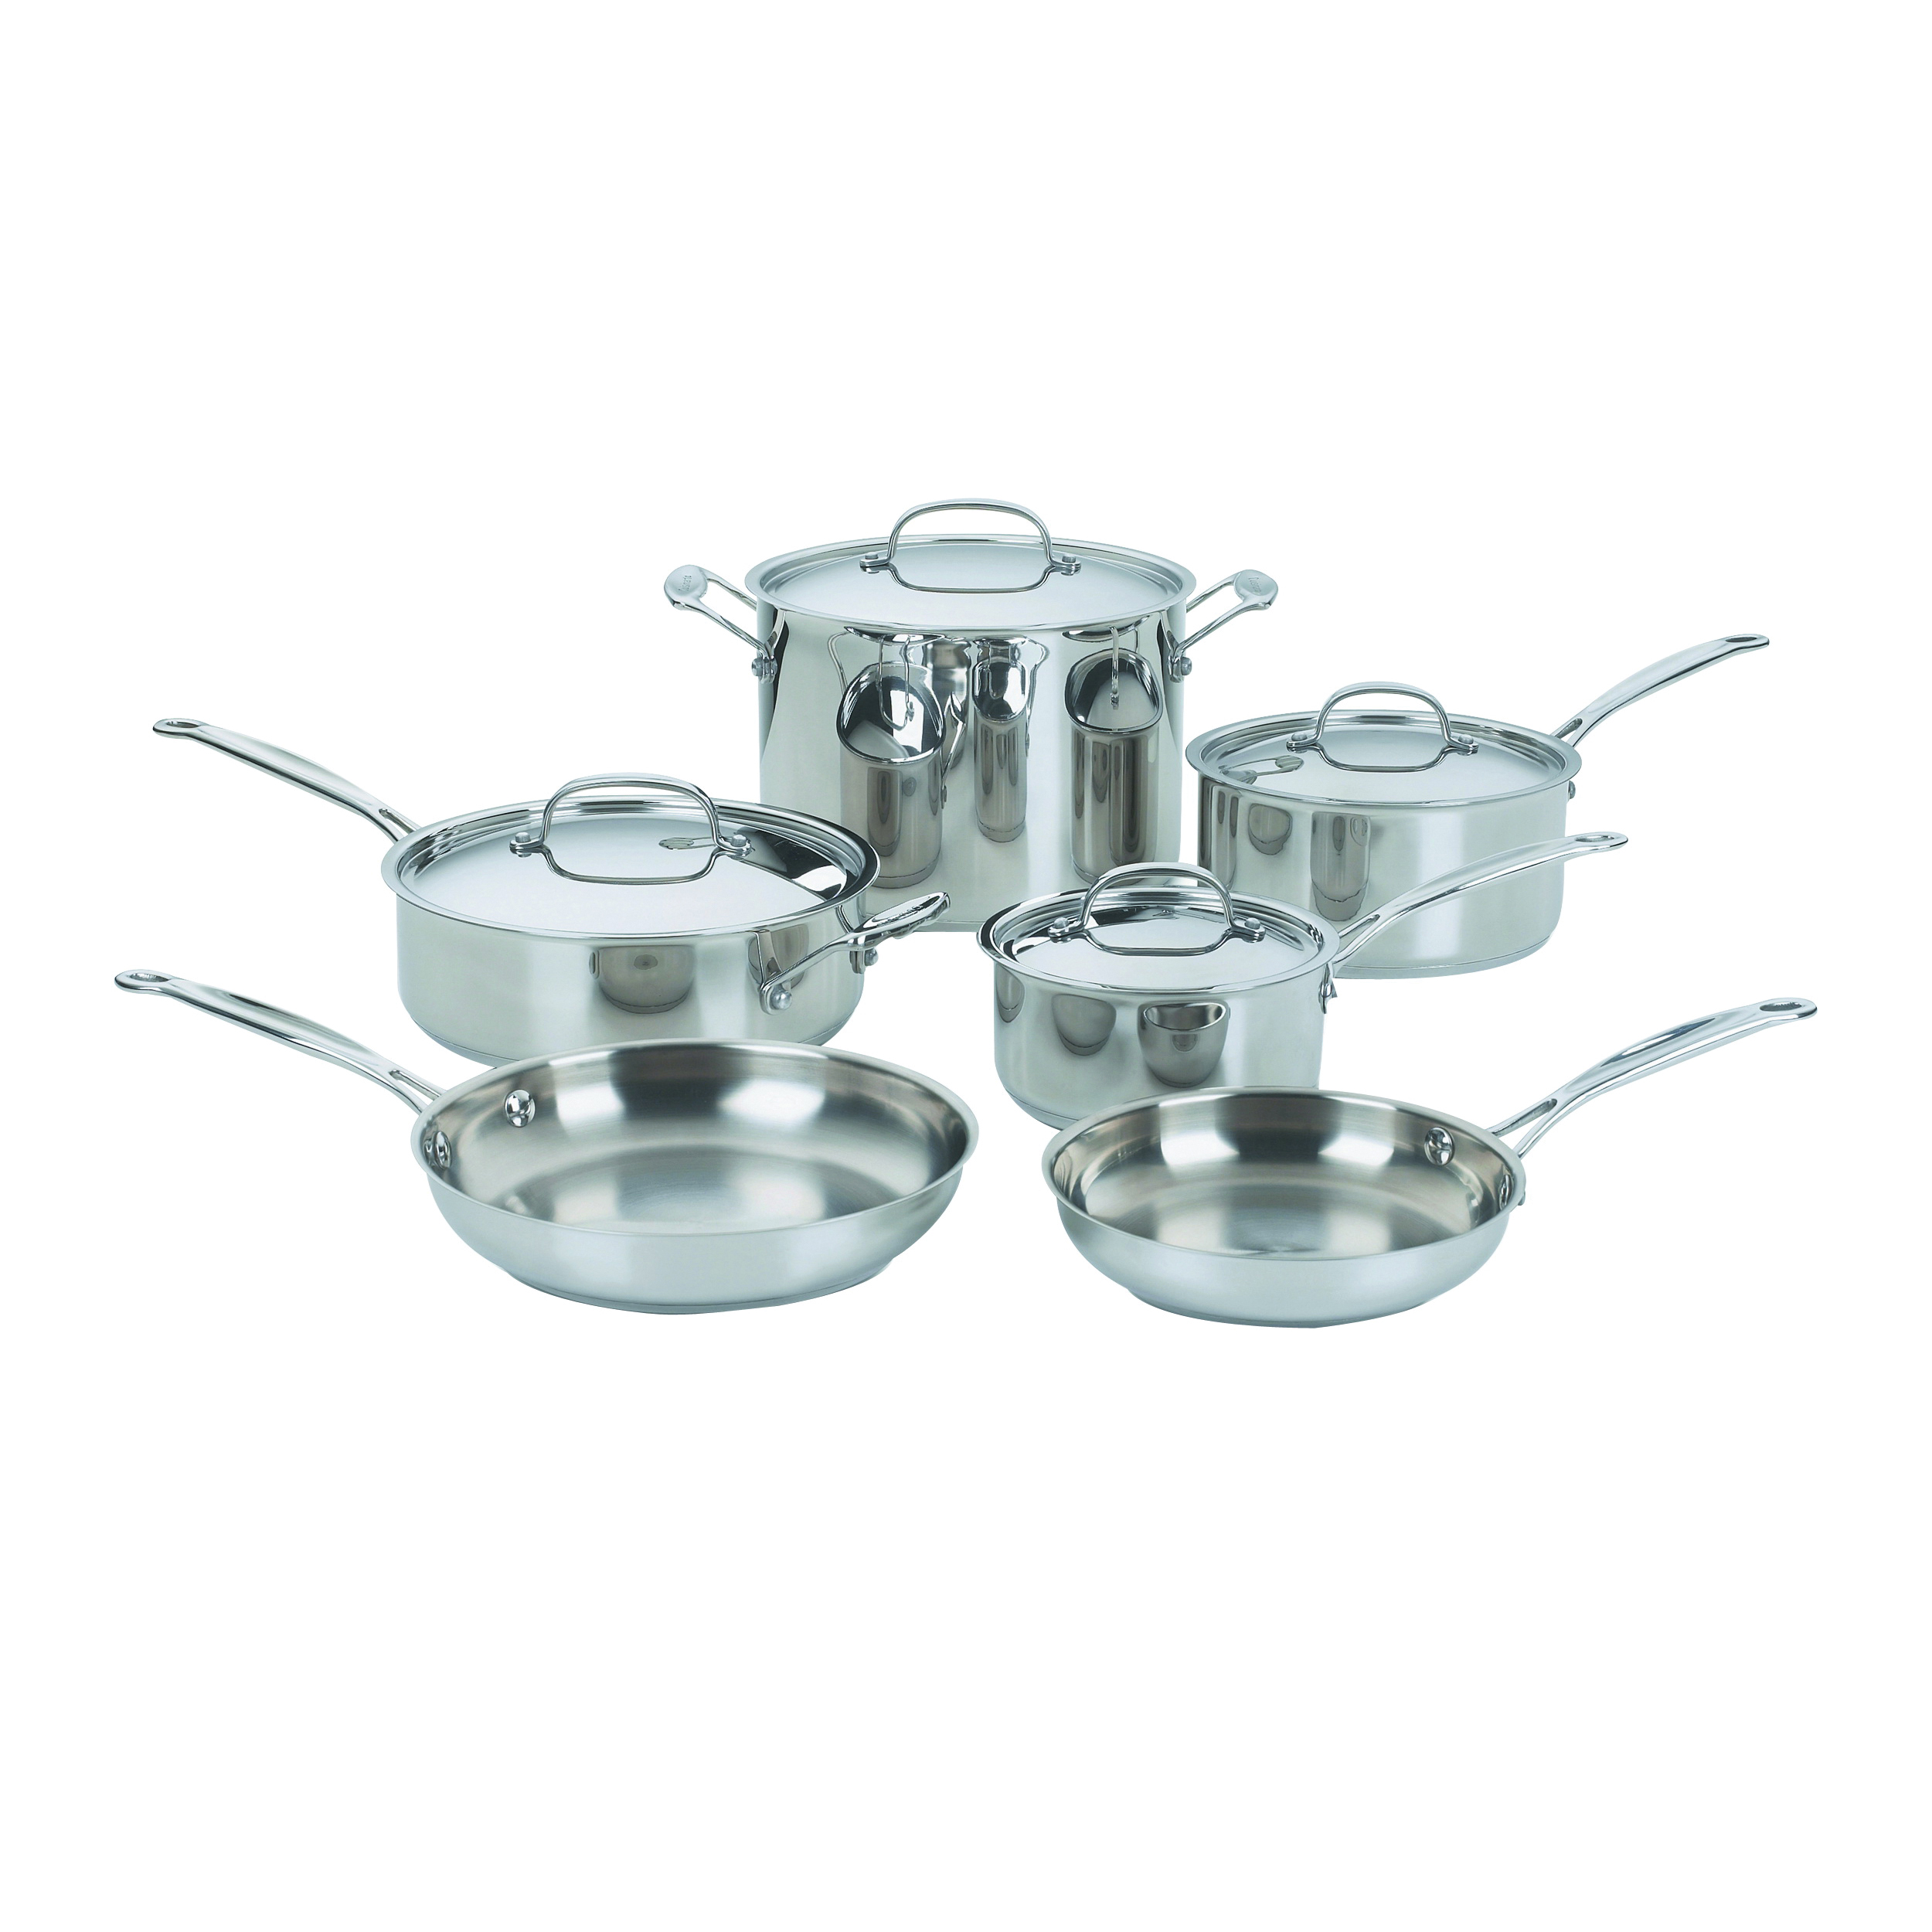 Chef's Classic 77-10 Cookware Set, Stainless Steel, Polished Mirror, 10-Piece